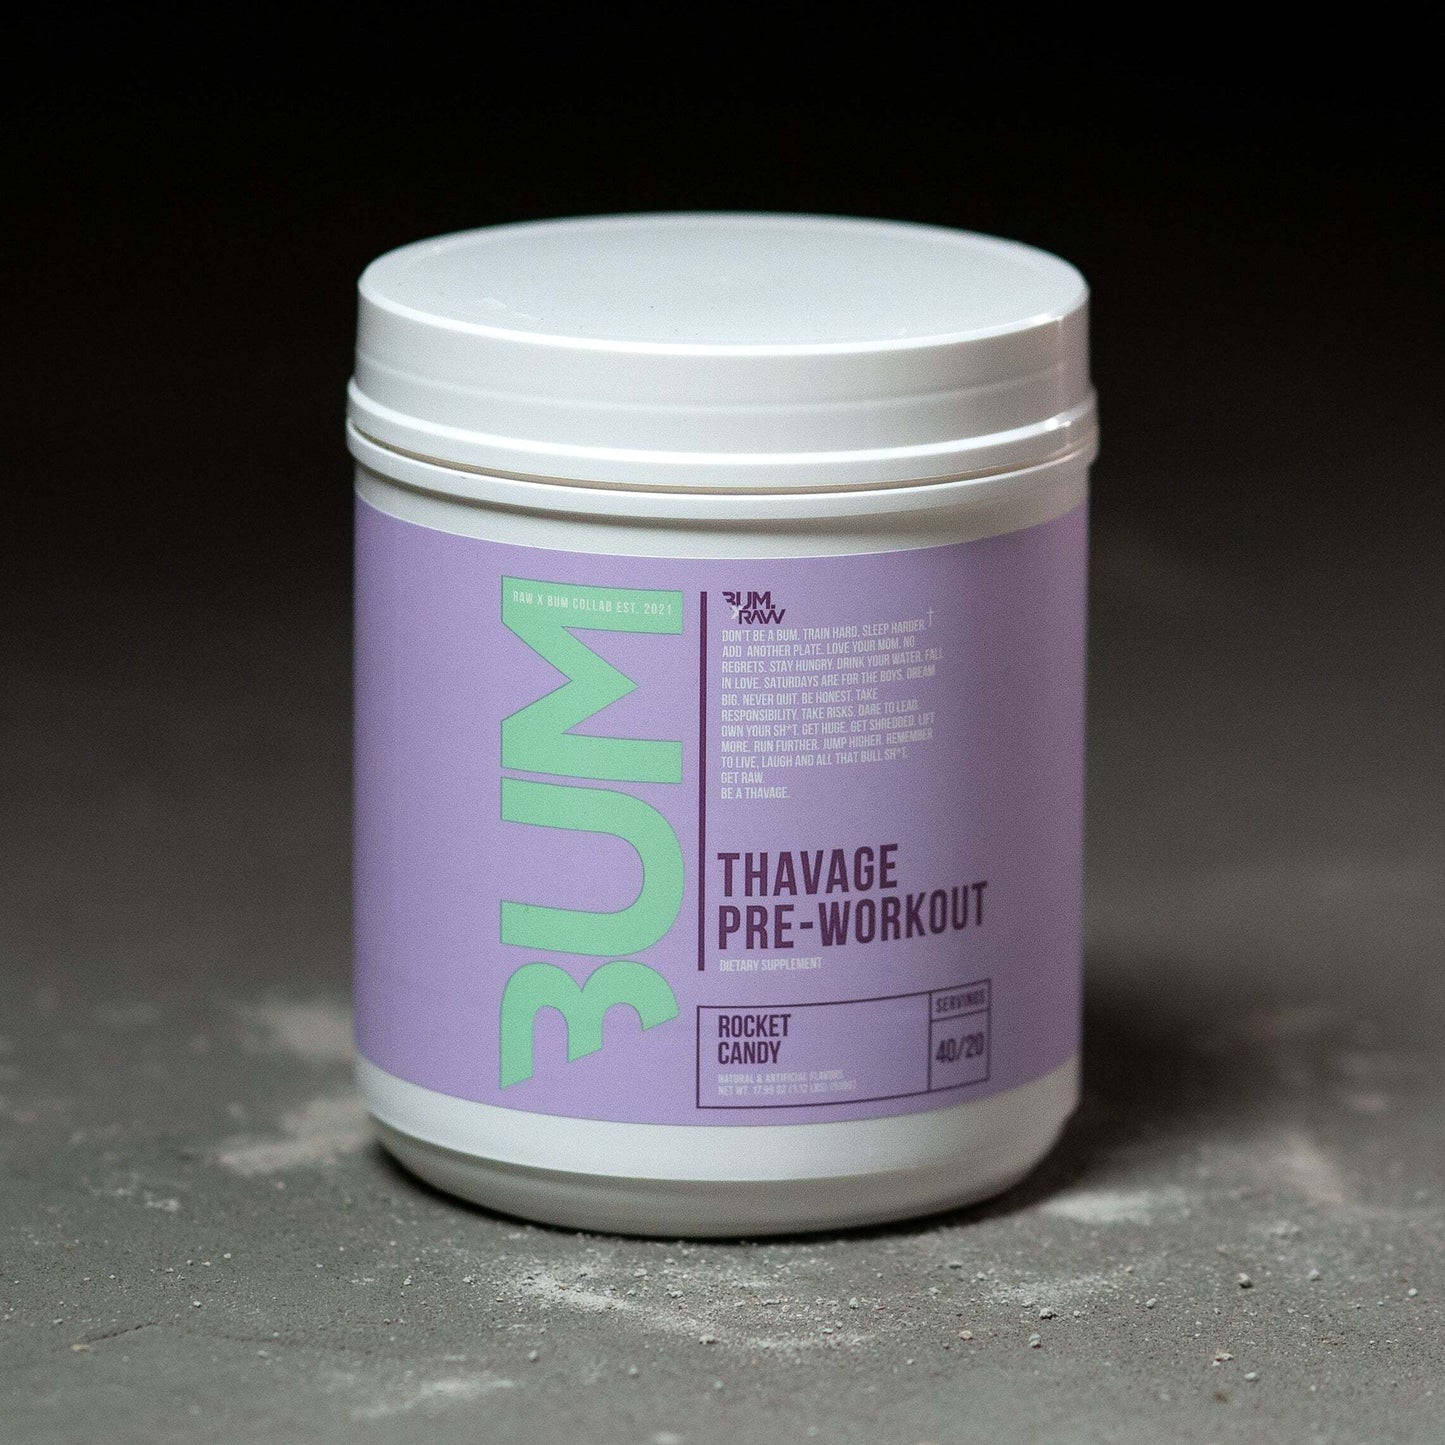 Raw Supps Thavage PRE-Workout